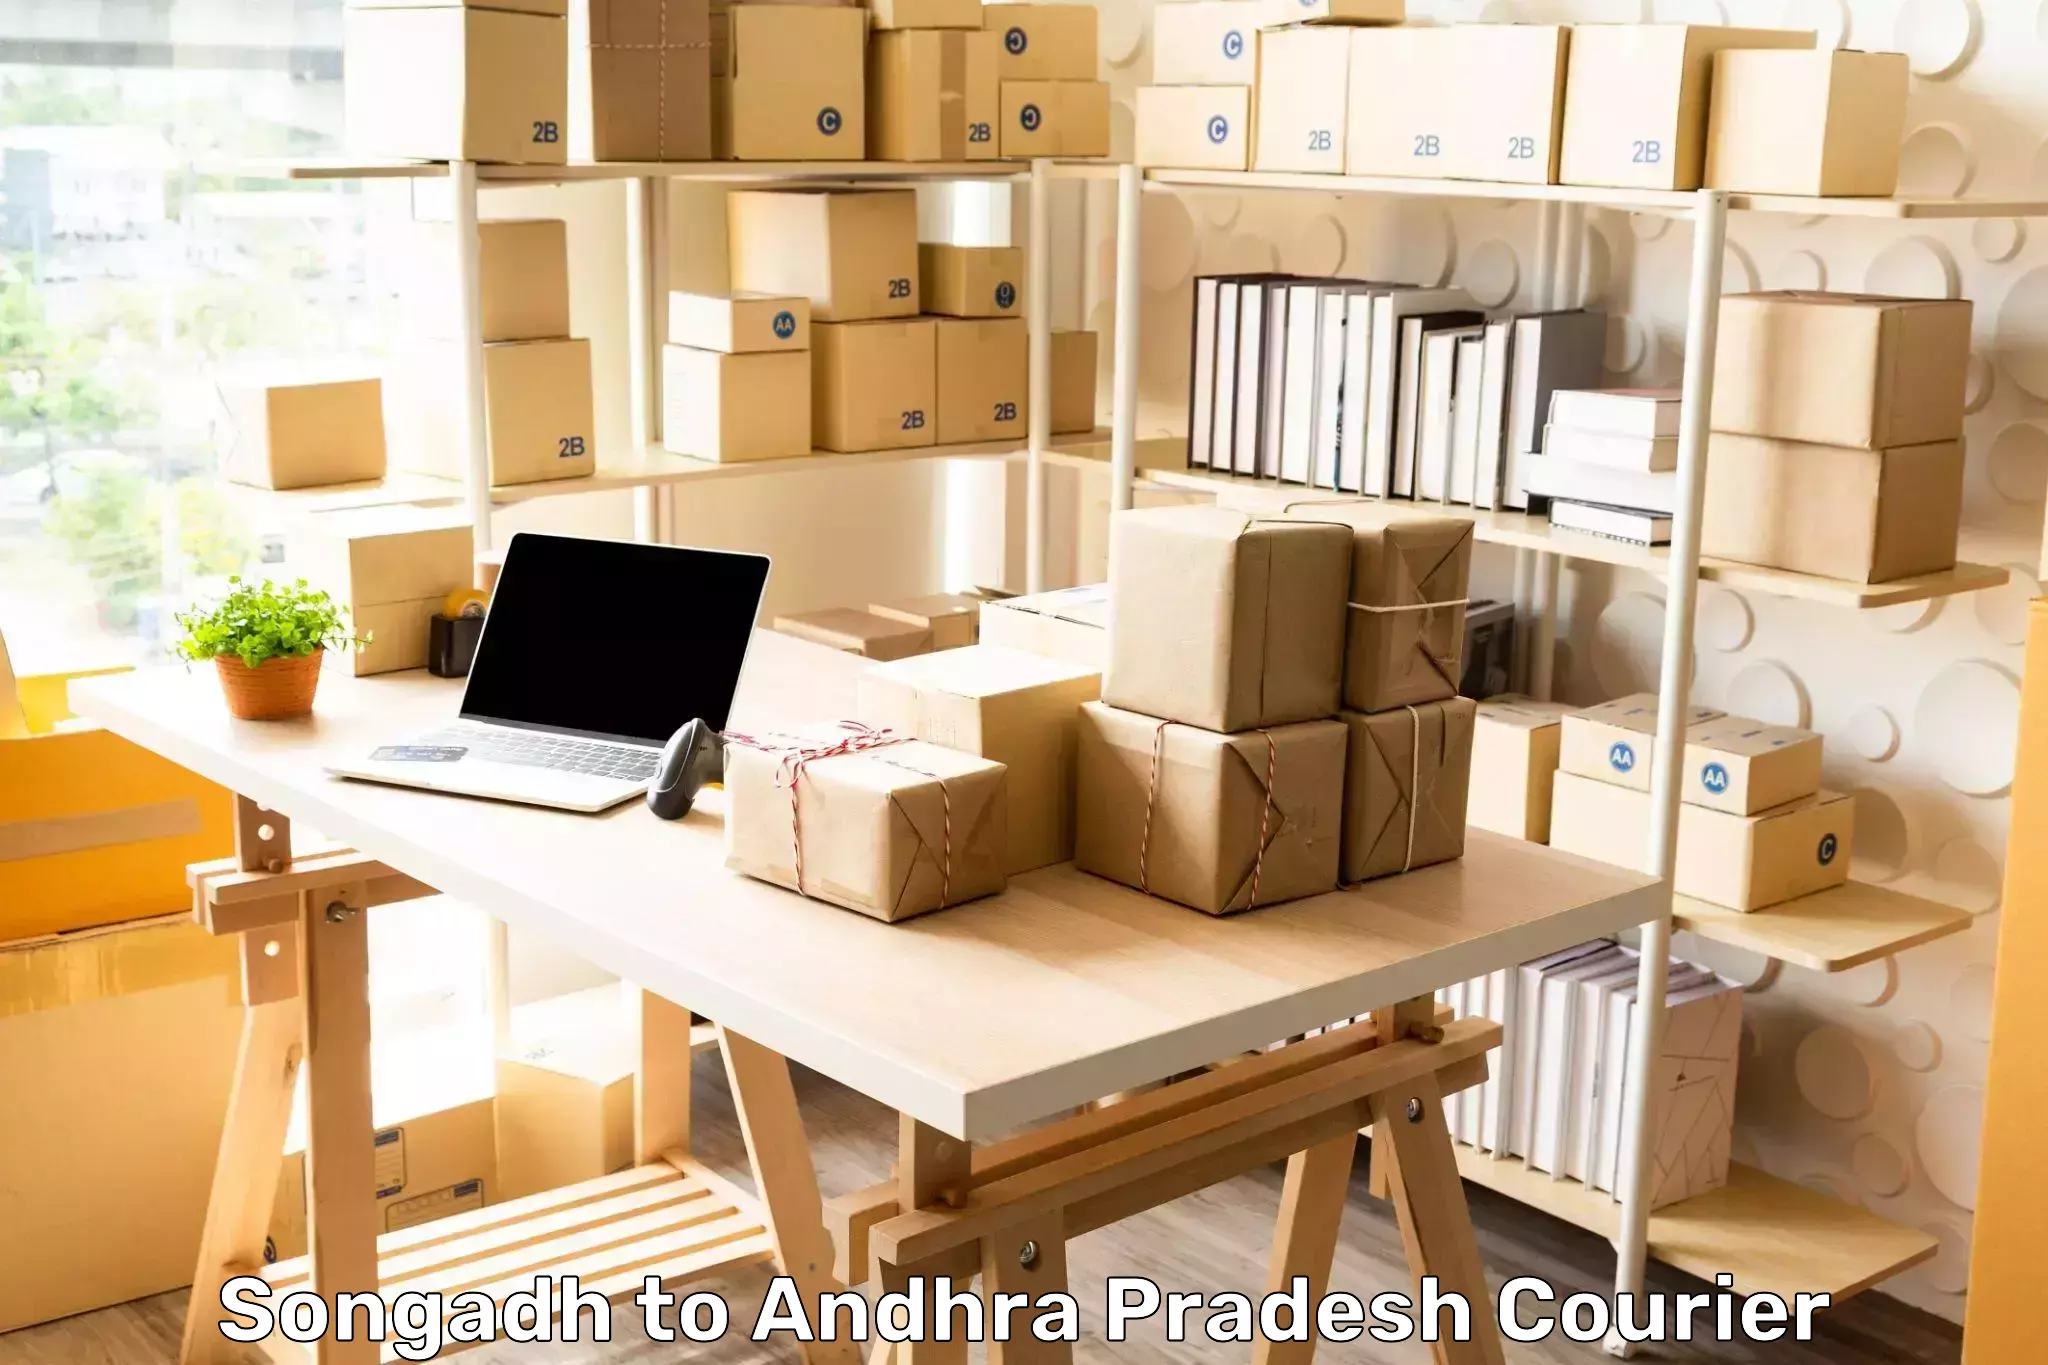 On-call courier service Songadh to Nellore